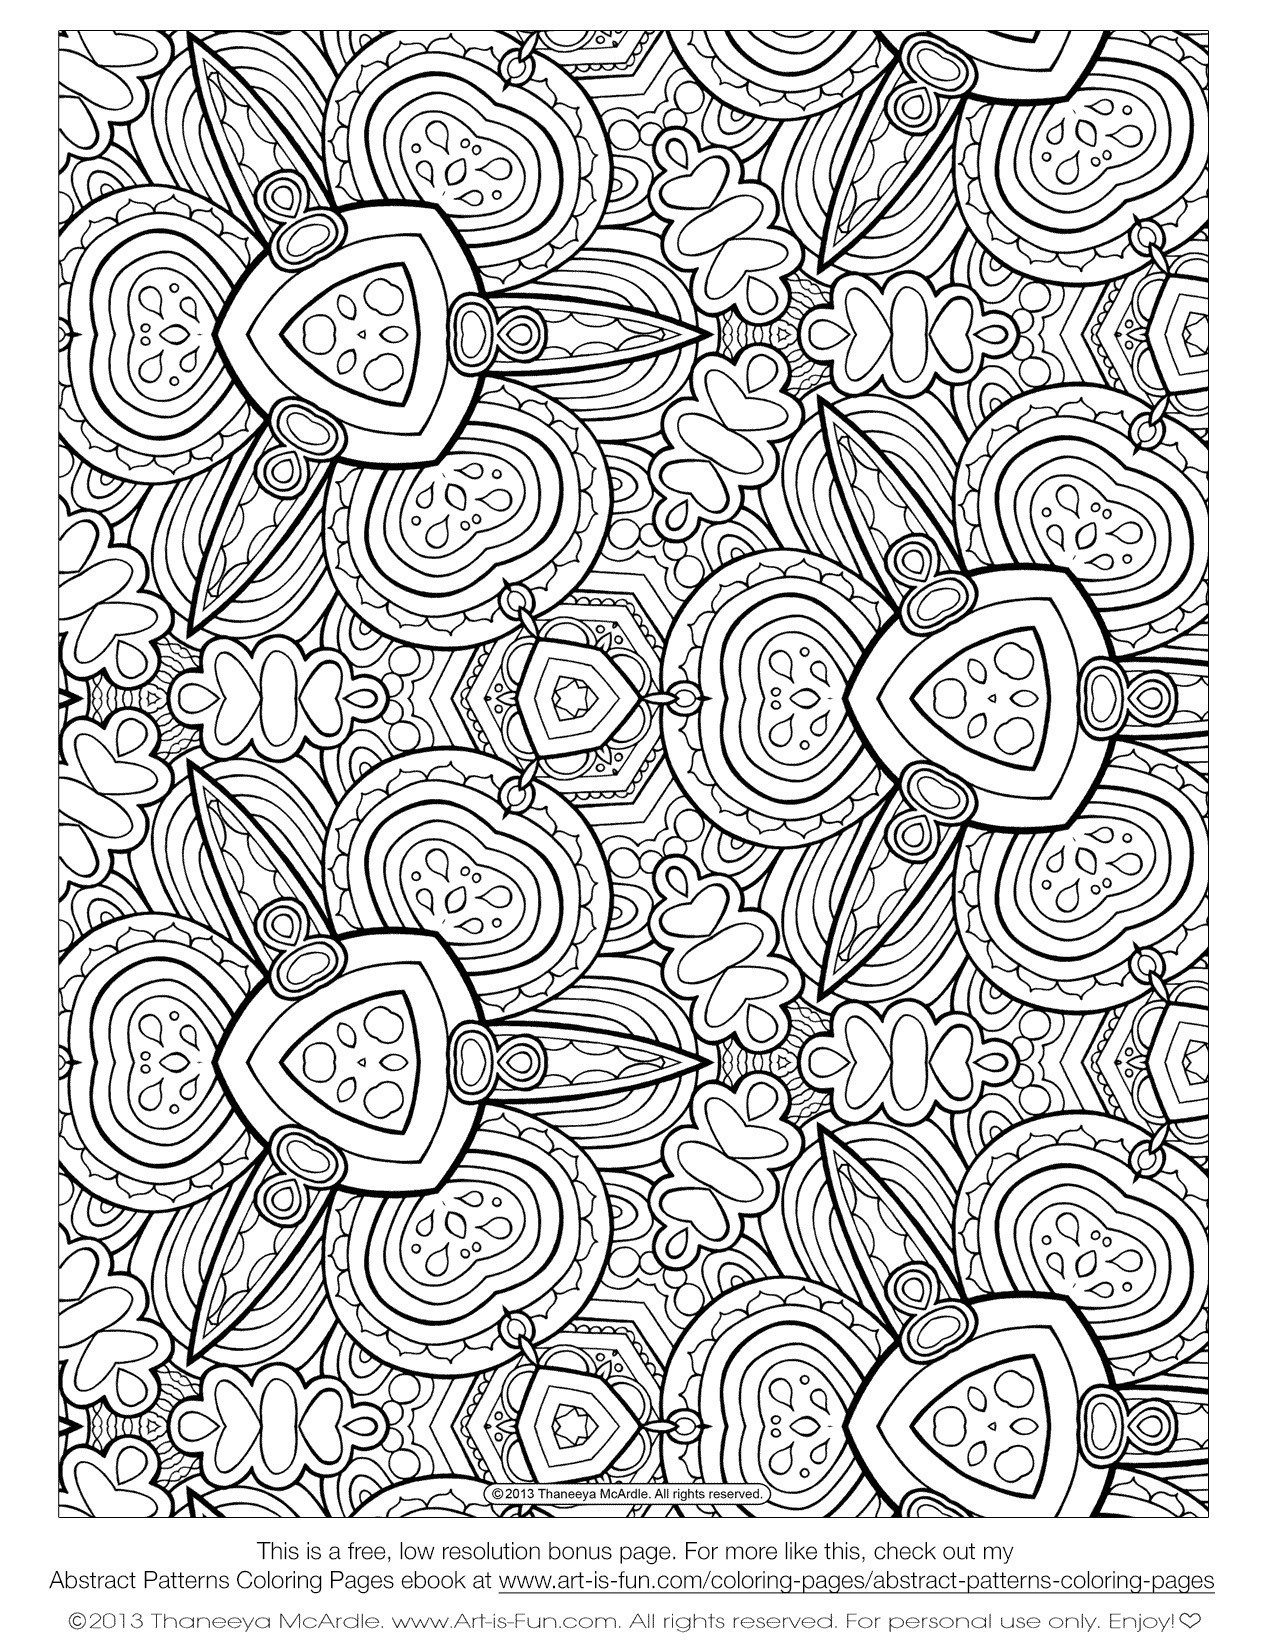 Coloring Pages : Free Printable Coloring Pages Adults Only Swear - Free Printable Coloring Pages For Adults Only Swear Words